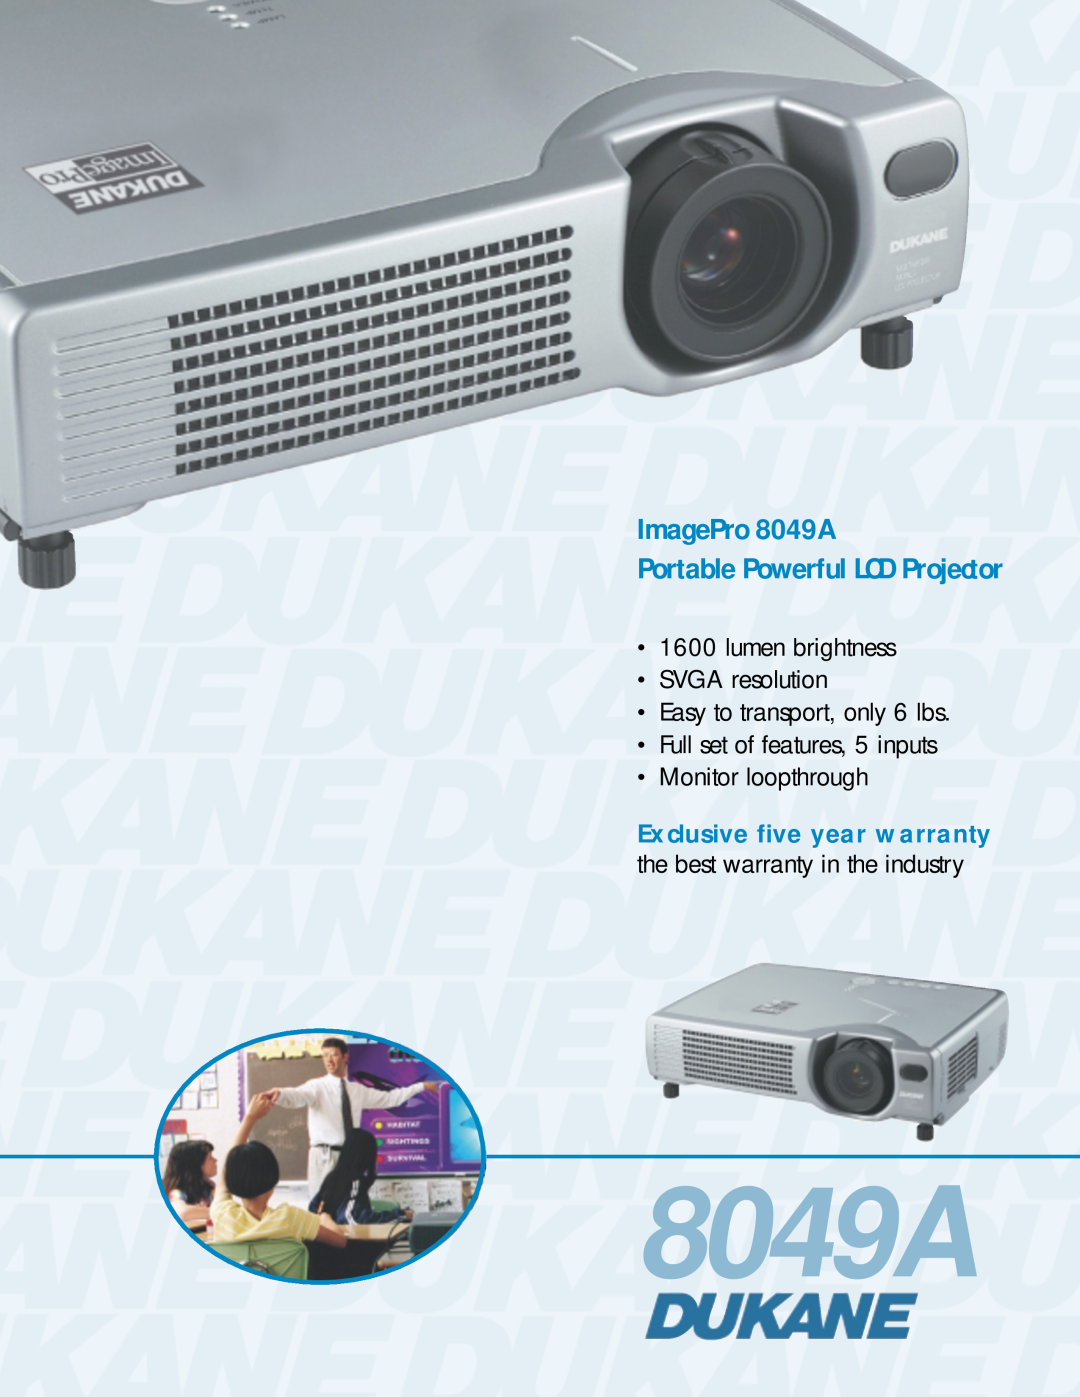 Dukane warranty ImagePro 8049A Portable Powerful LCD Projector, Full set of features, 5 inputs Monitor loopthrough 